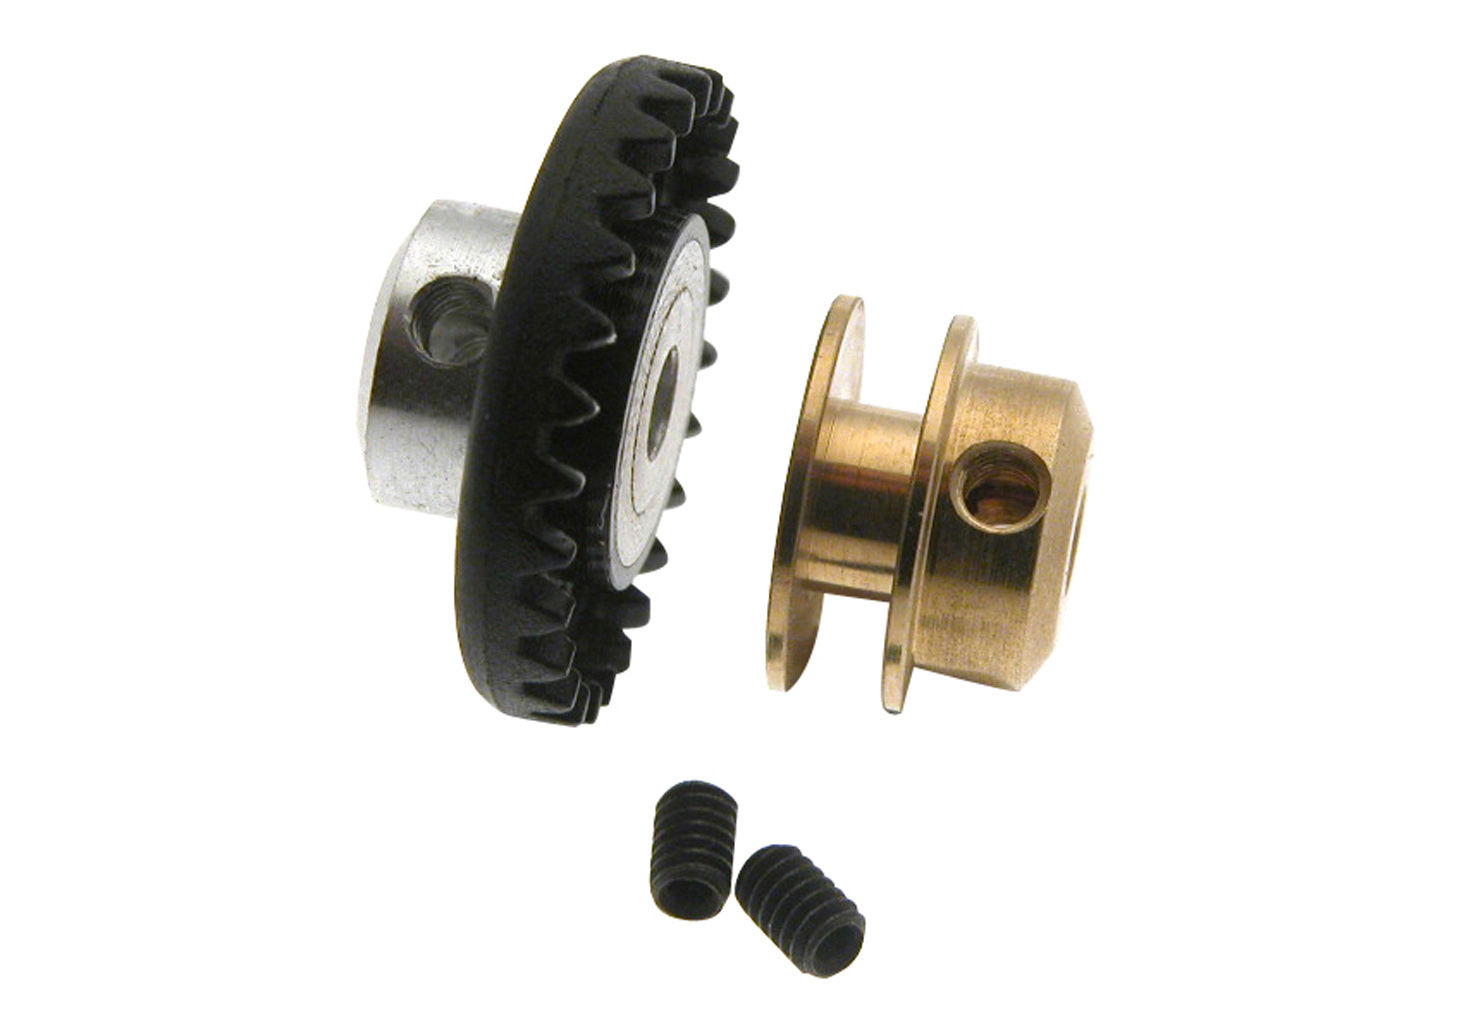 SC-1113 Nylon crown Gear 27t. M50 with M2 screw for 3/32" axle